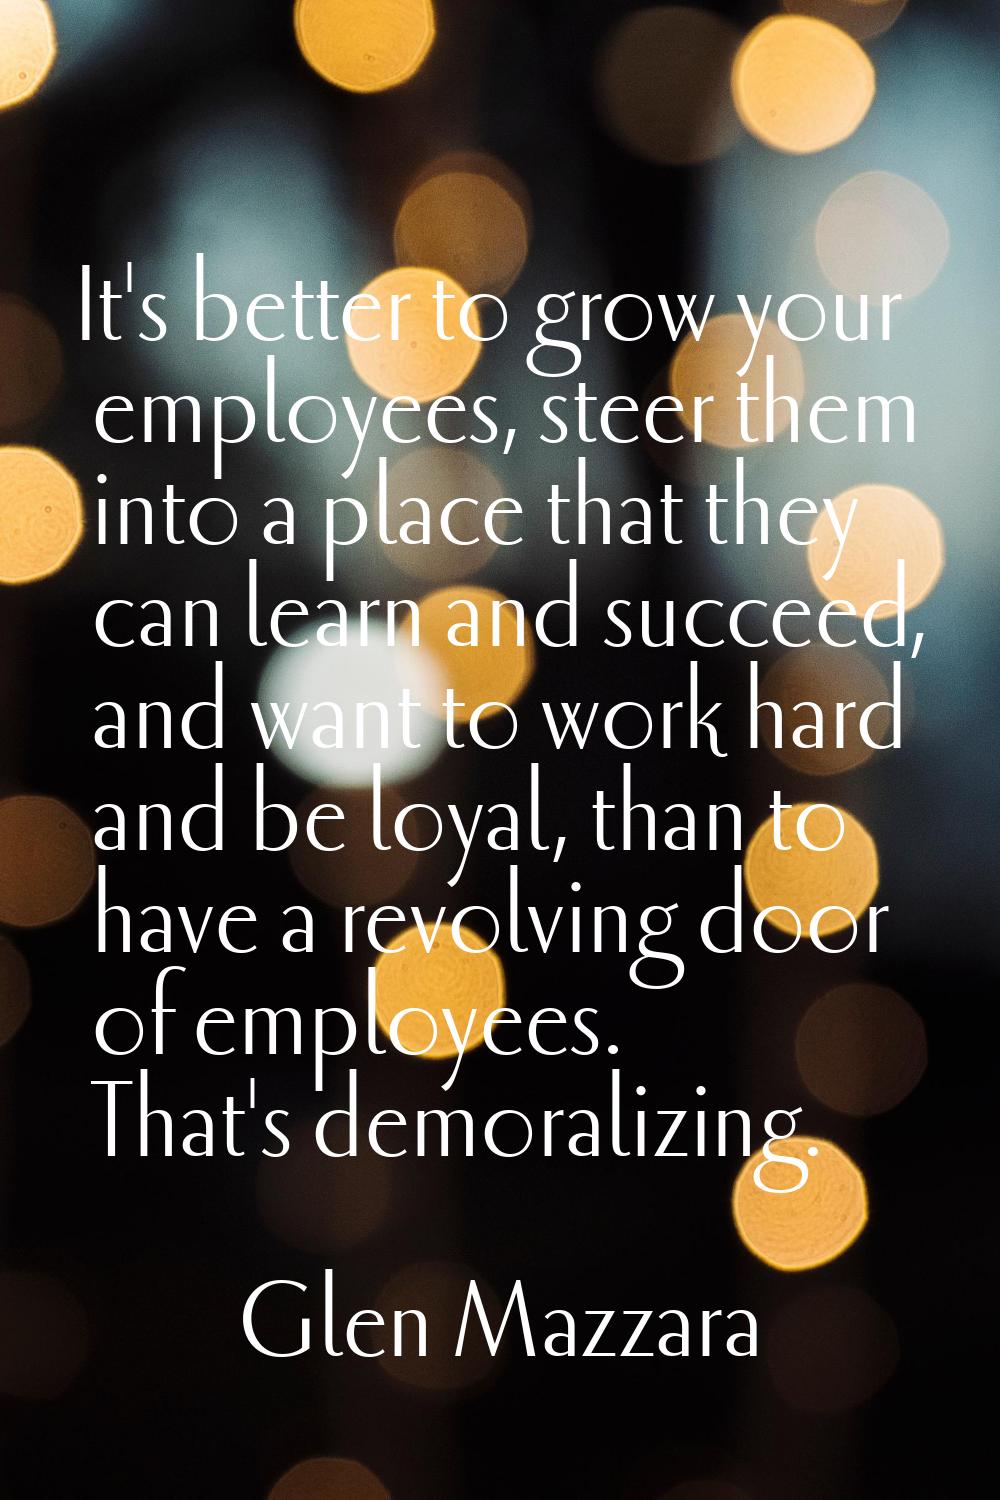 It's better to grow your employees, steer them into a place that they can learn and succeed, and wa